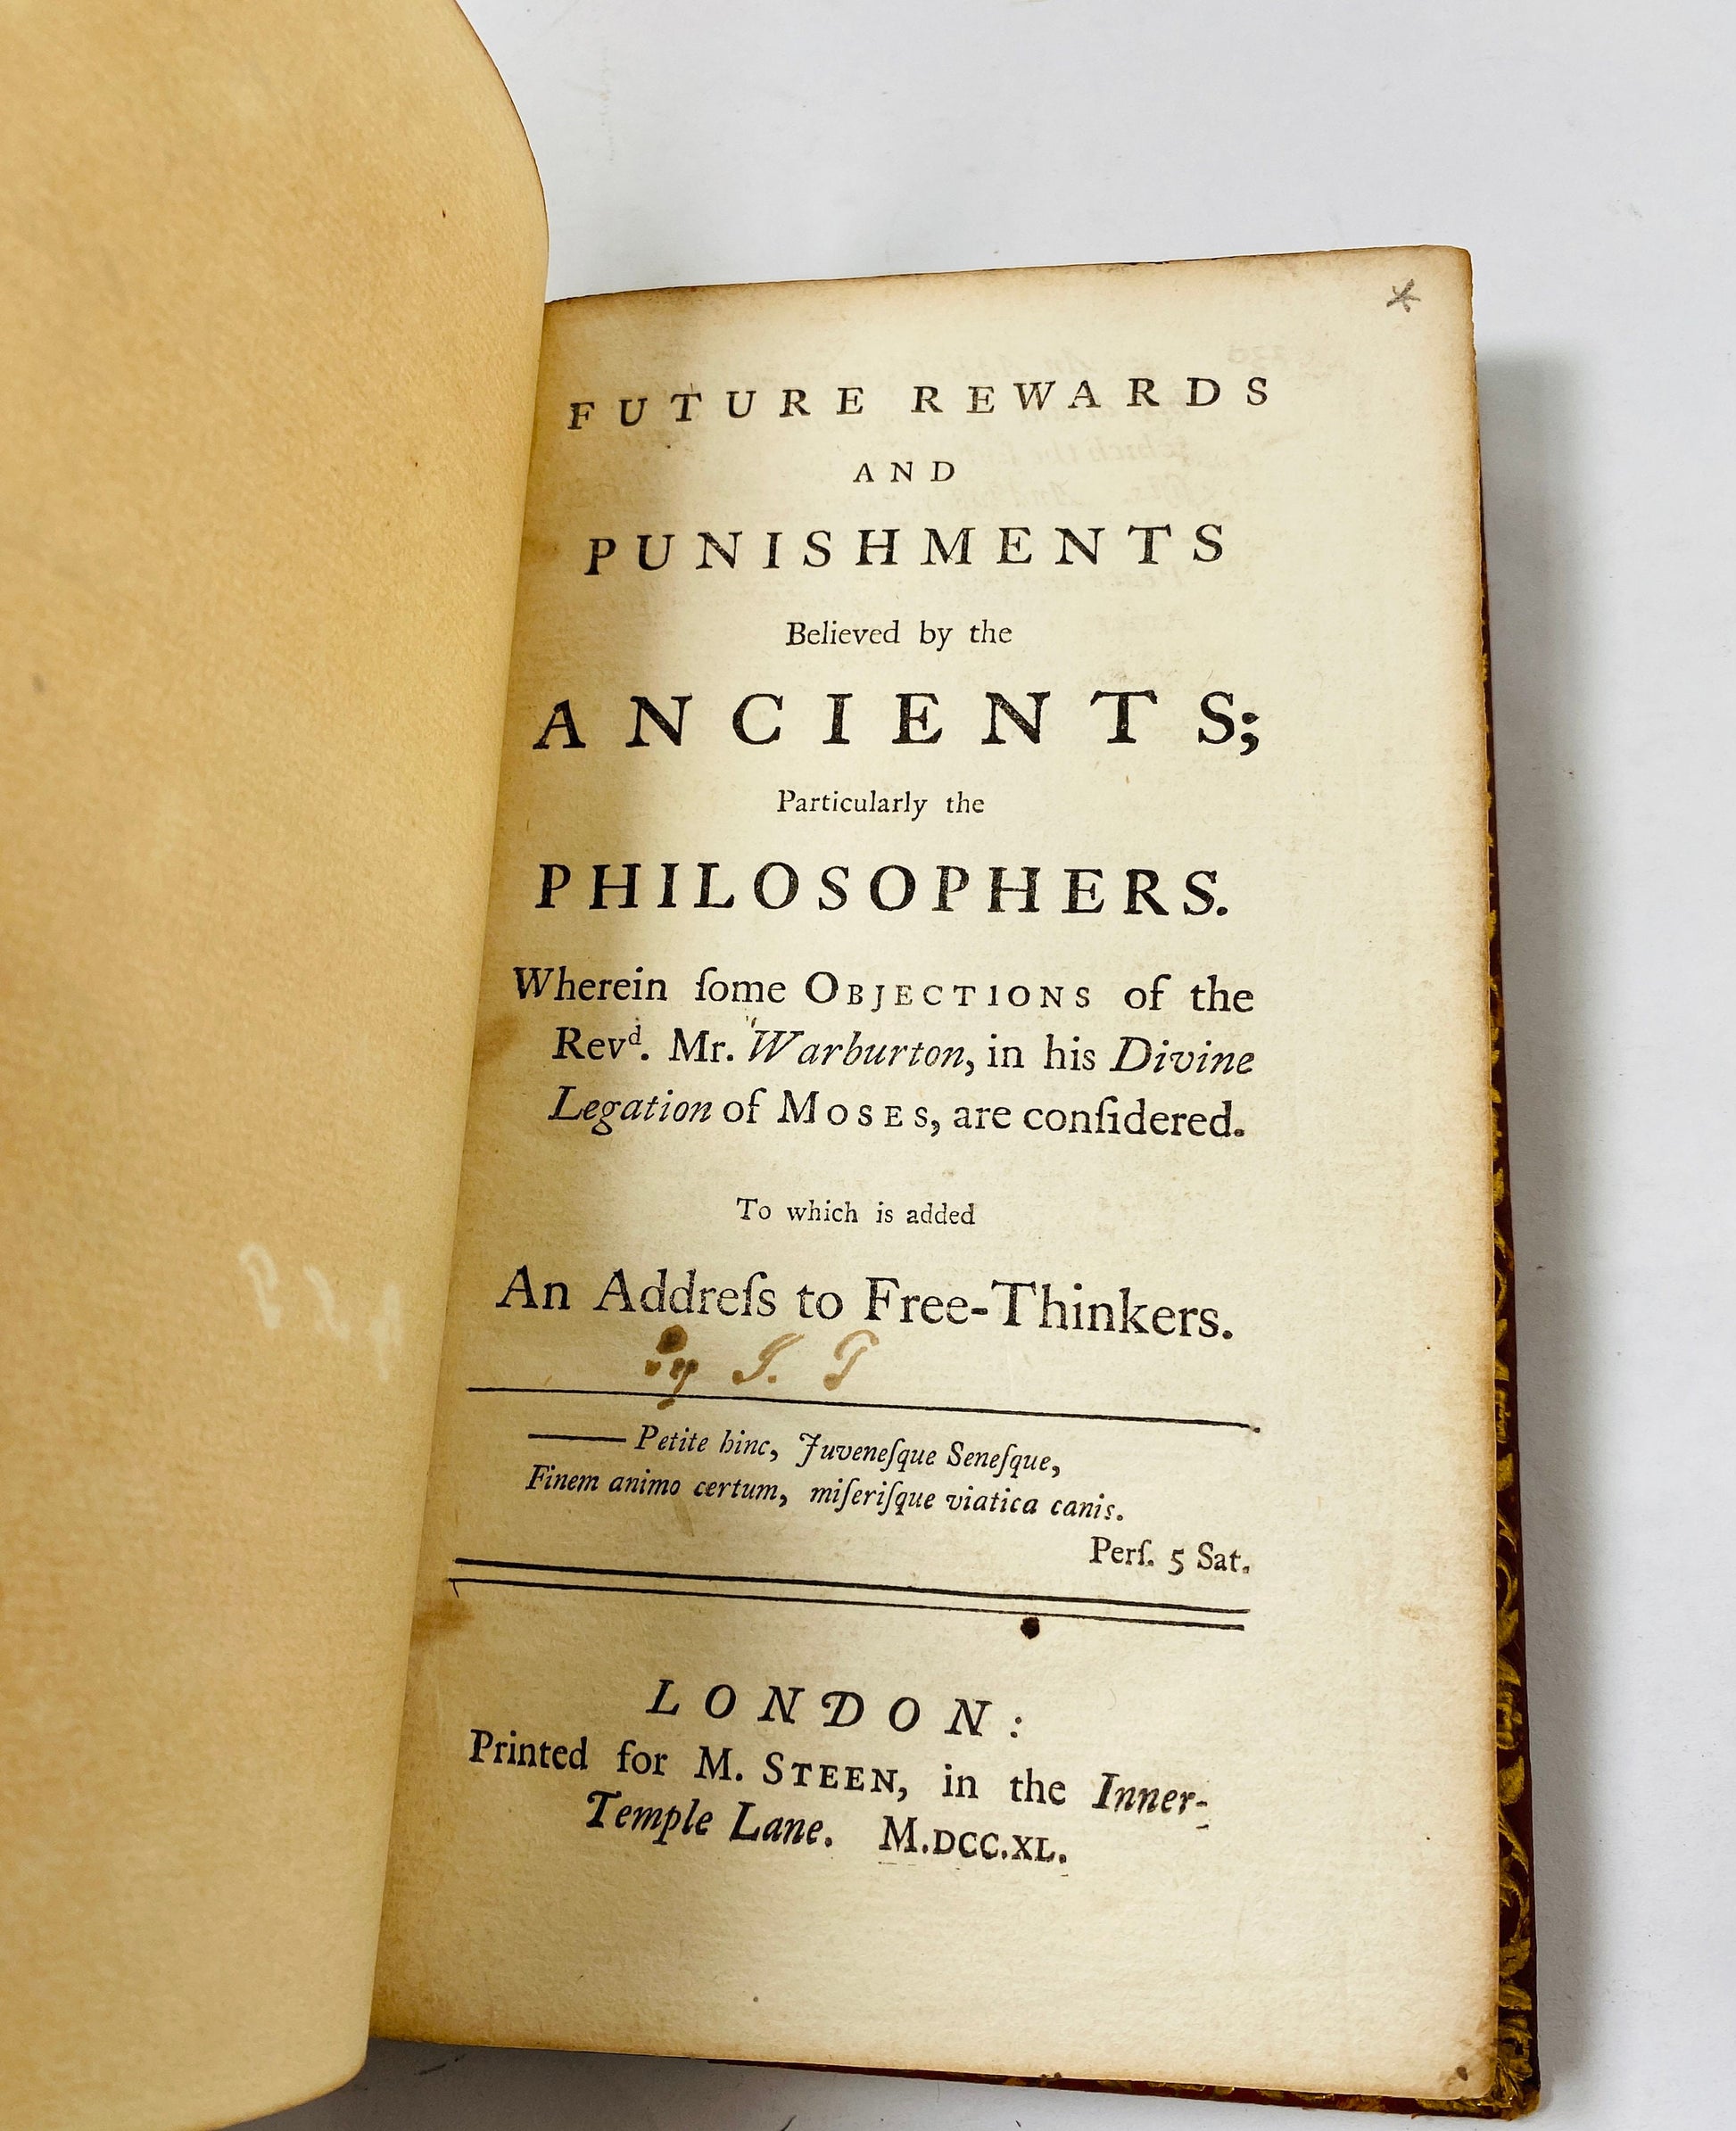 Future rewards and punishments believed by the ancients; particularly the philosophers vintage book circa 1740 by John Tillard in London